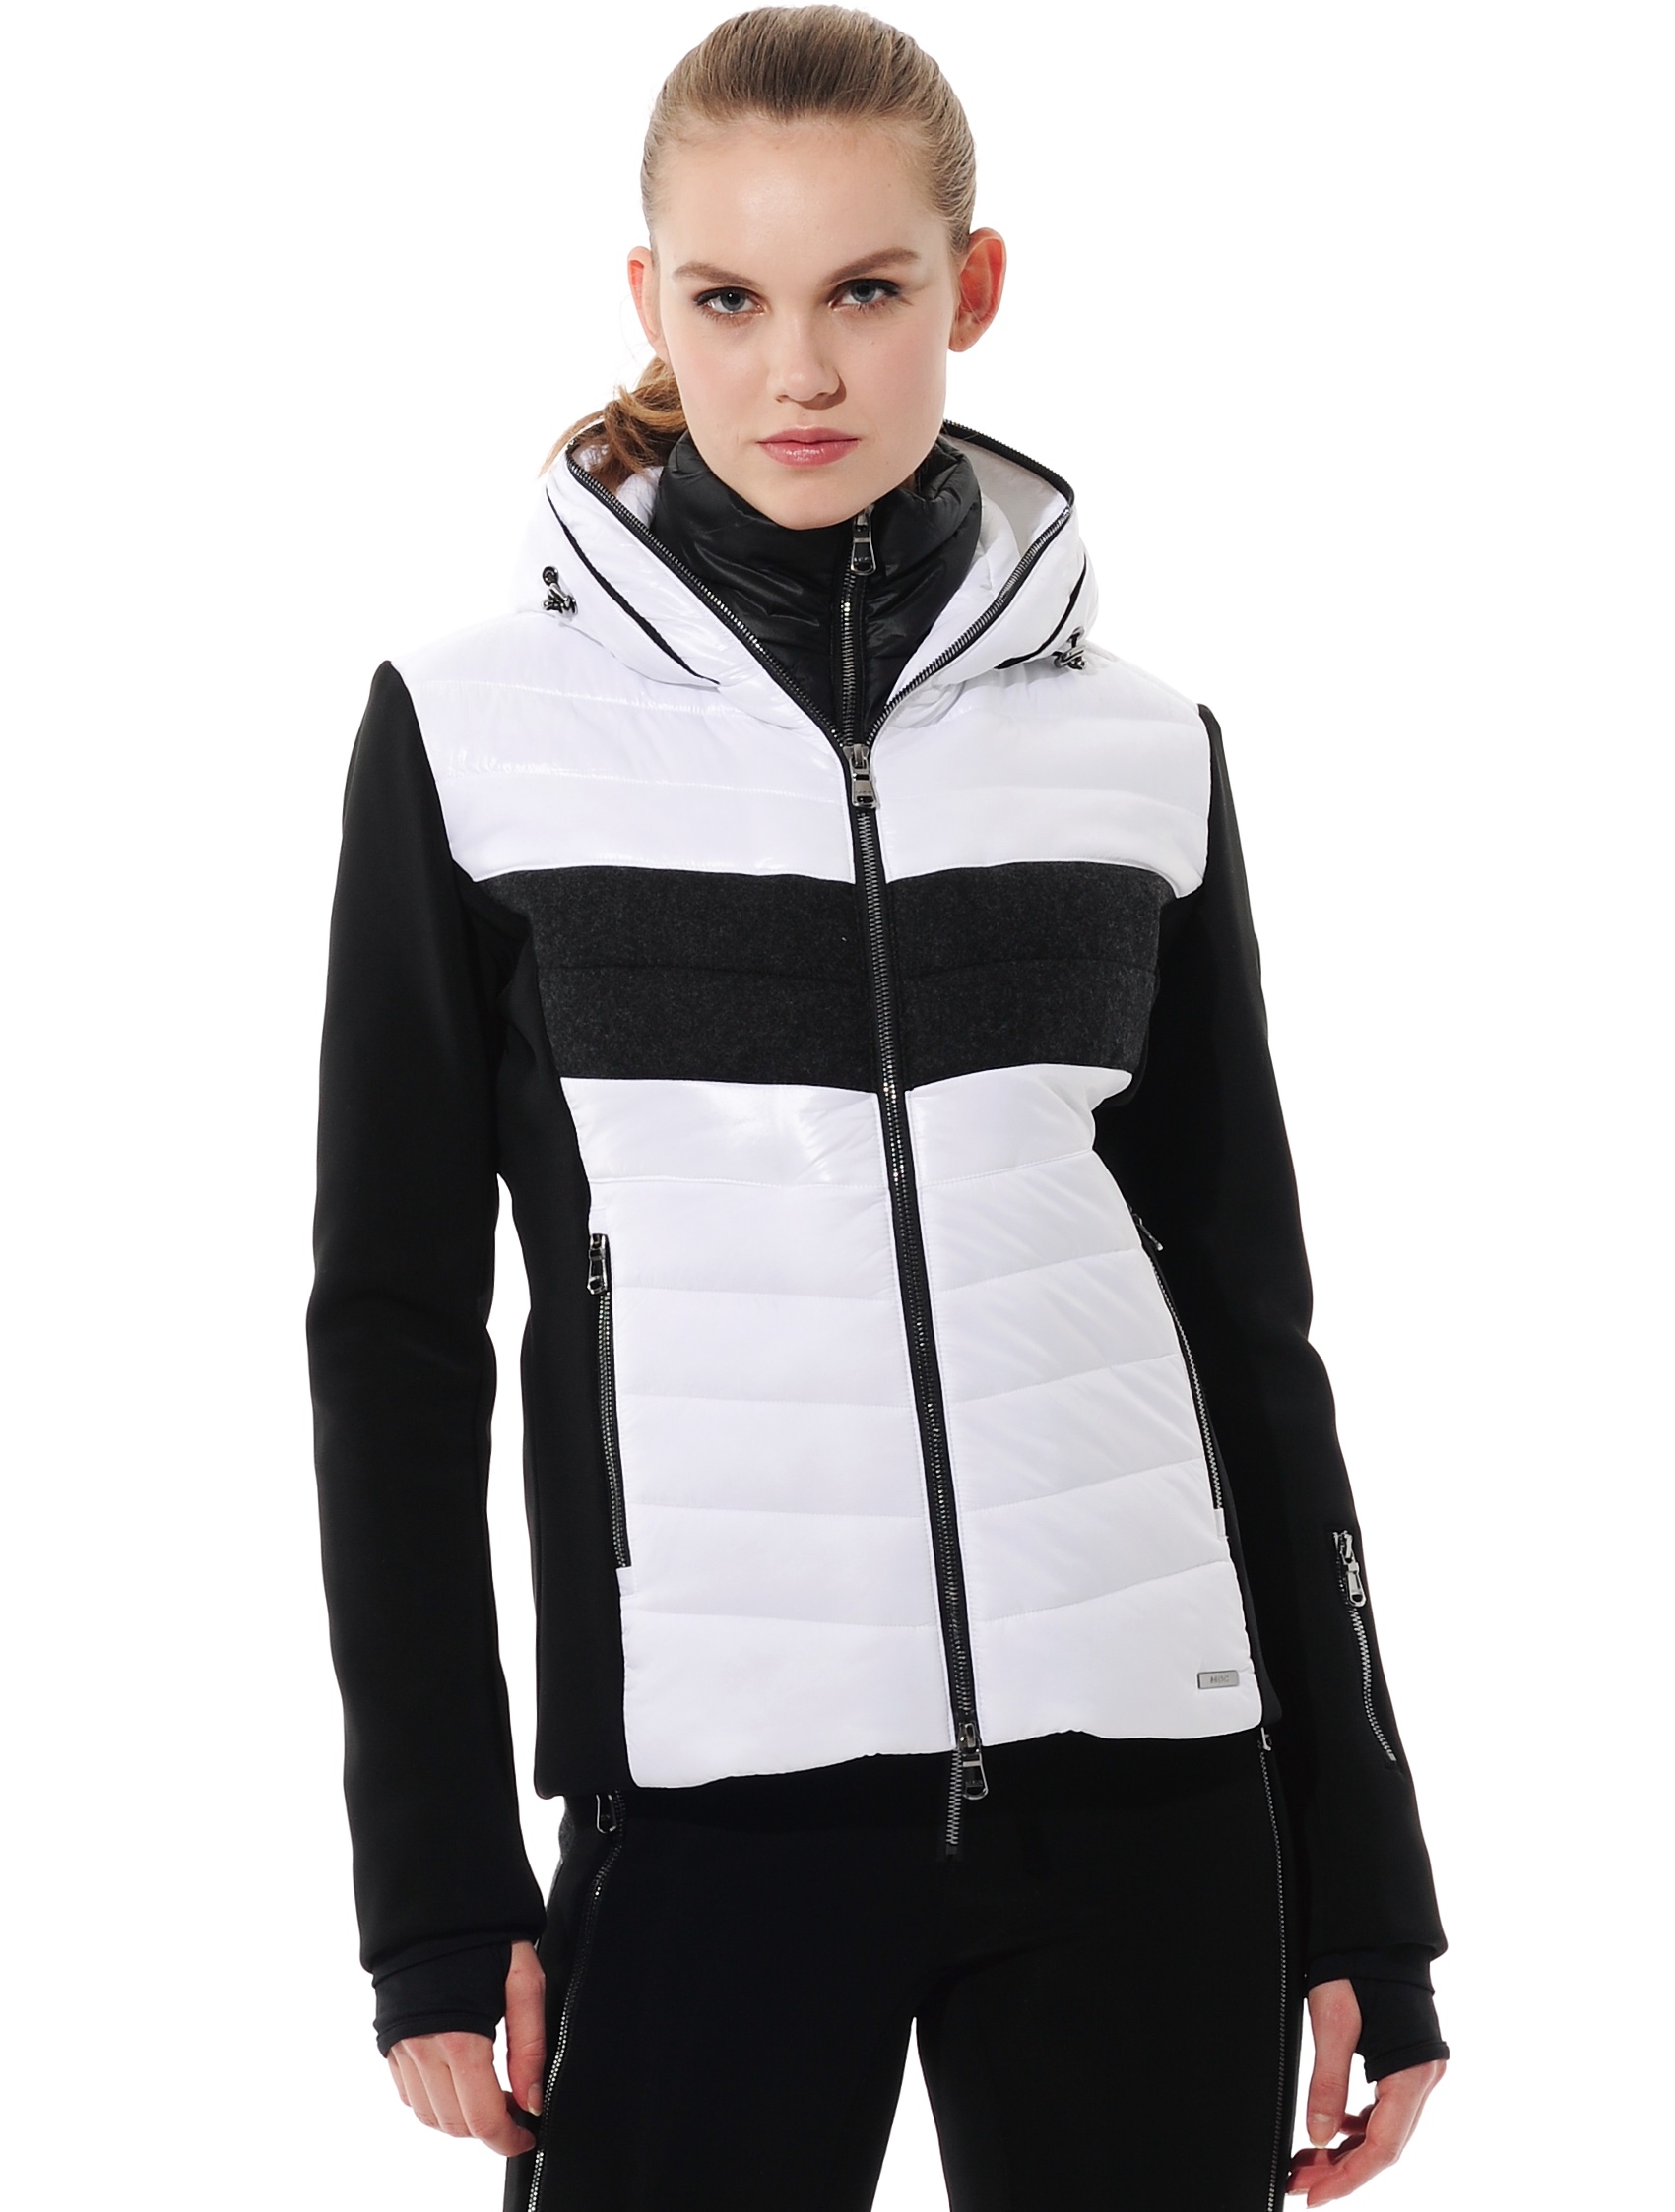 ski jacket with 4way stretch sleeves and side panels white/black 